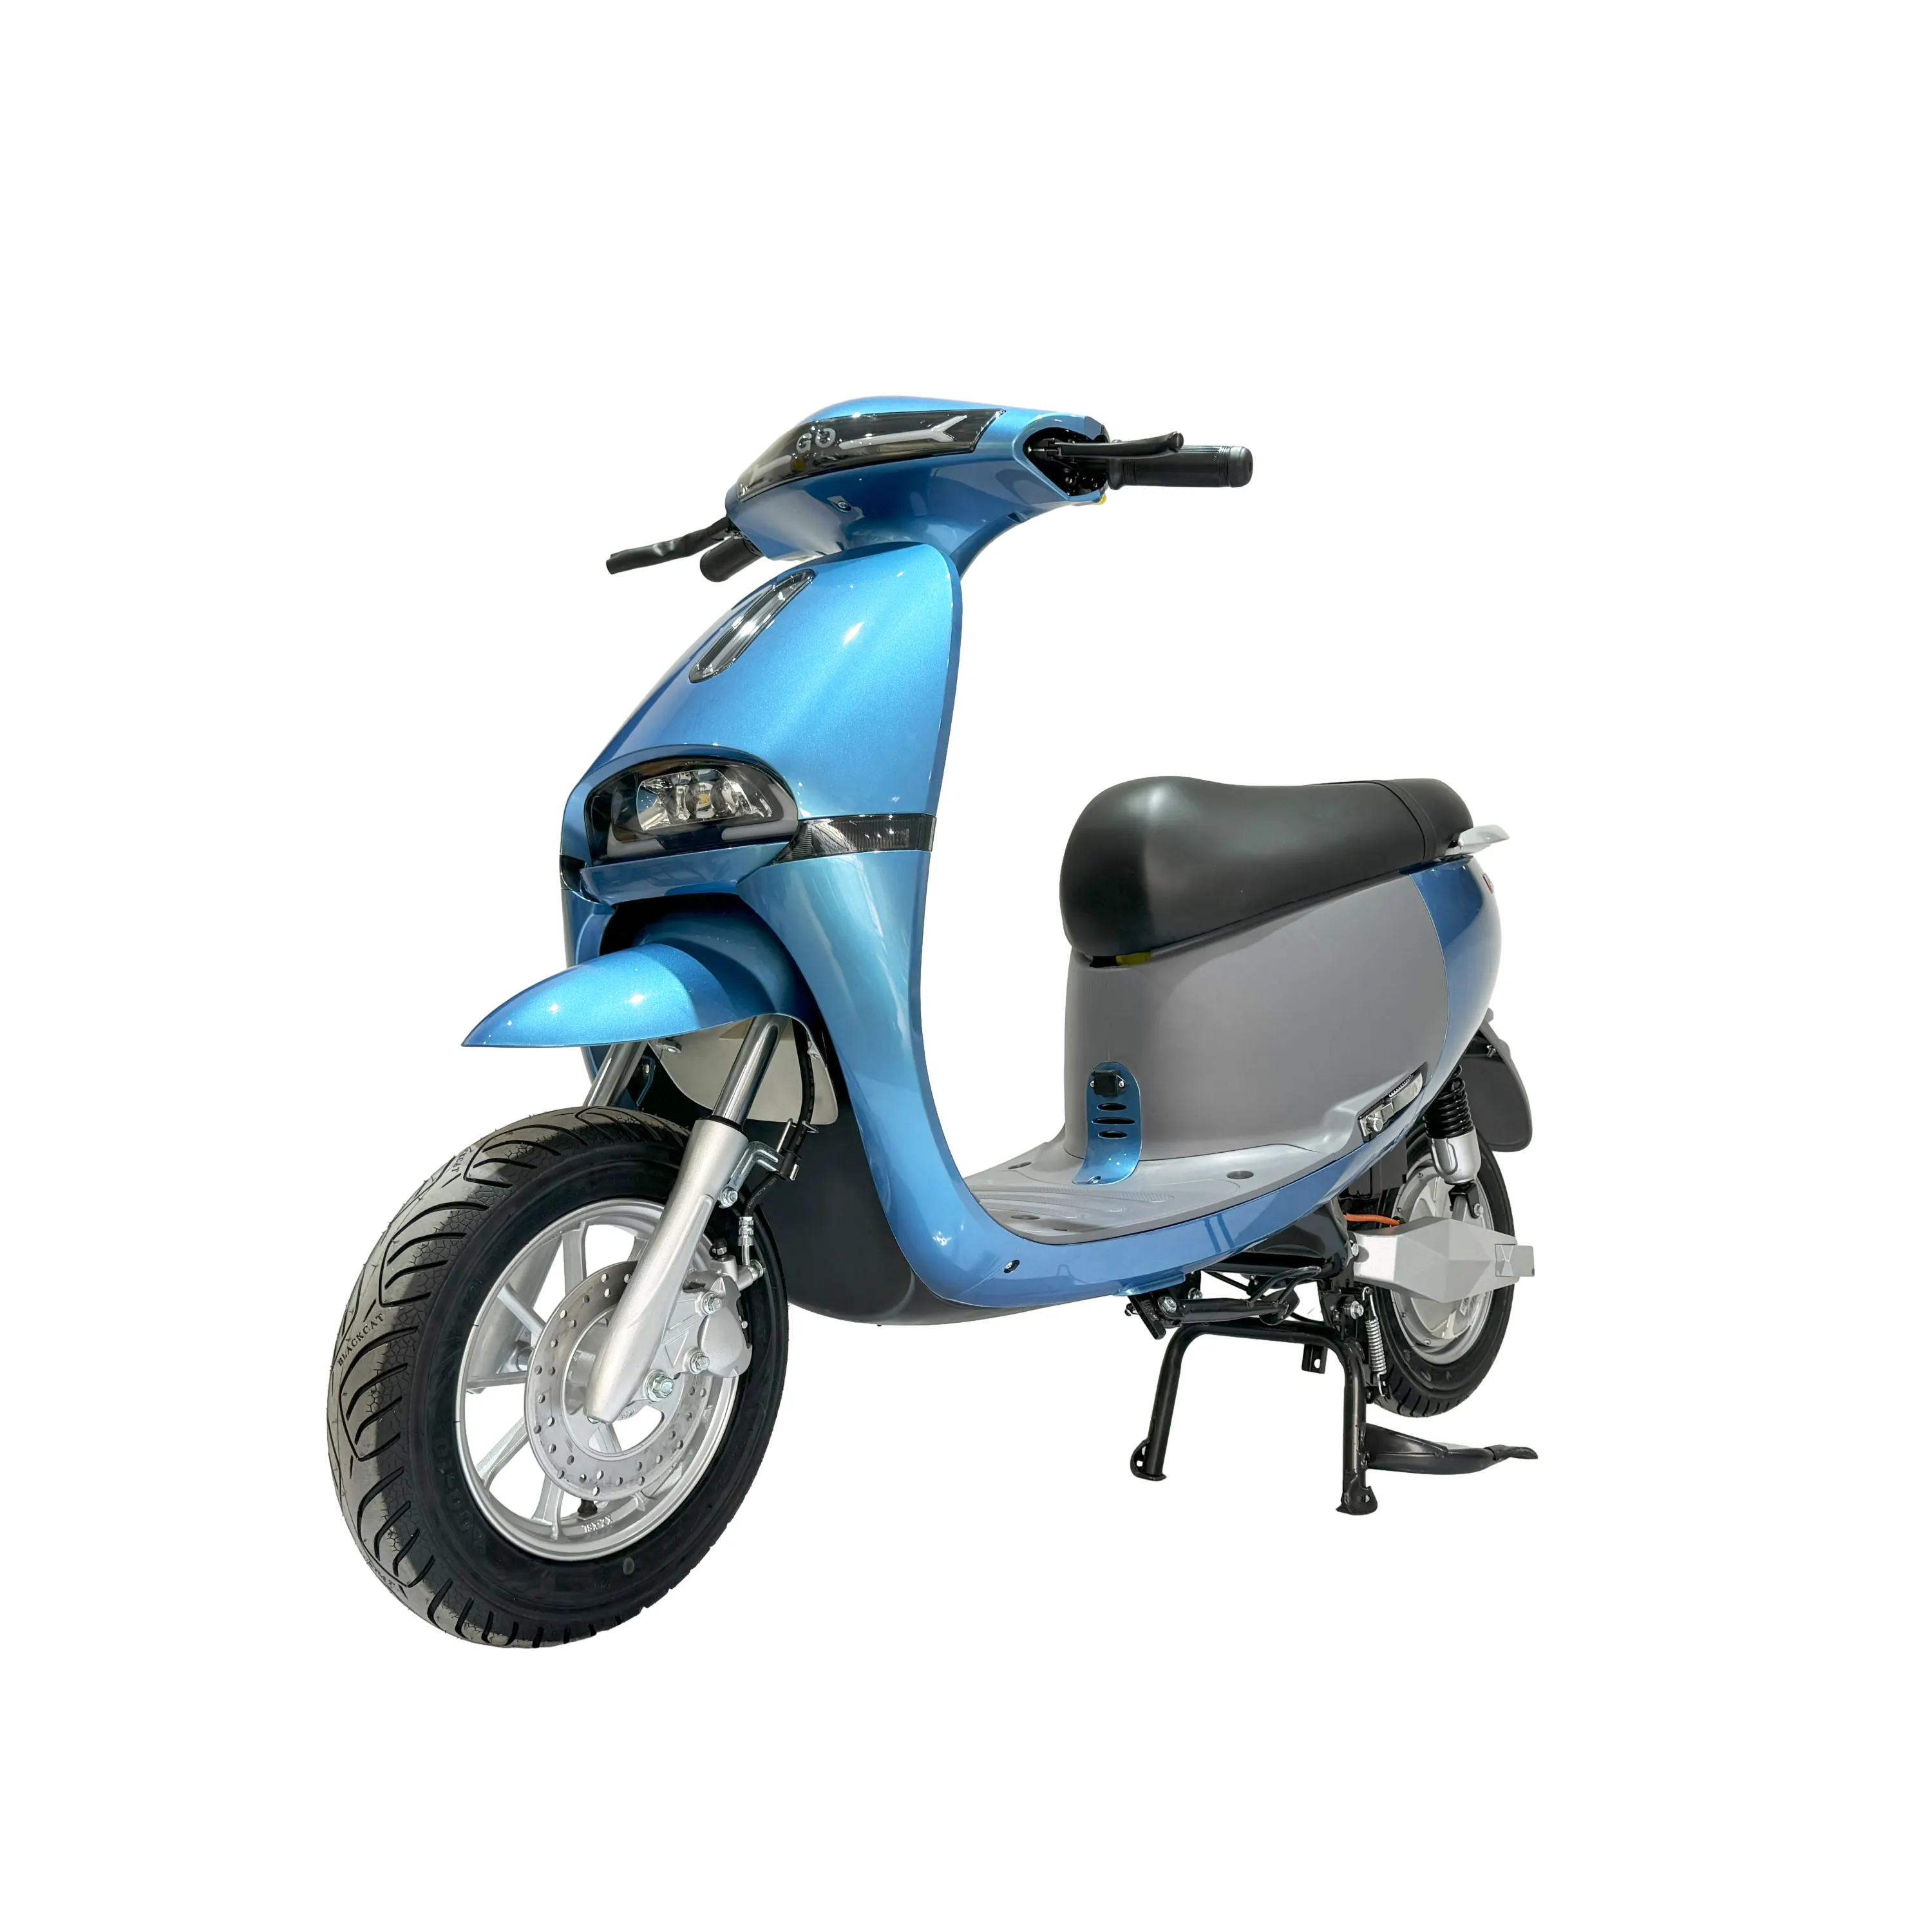 Factory Direct Sale Adult Moto Electrica Motorcycle 60V 1000W Ckd Skd Fashionable Newest Electric Scooter